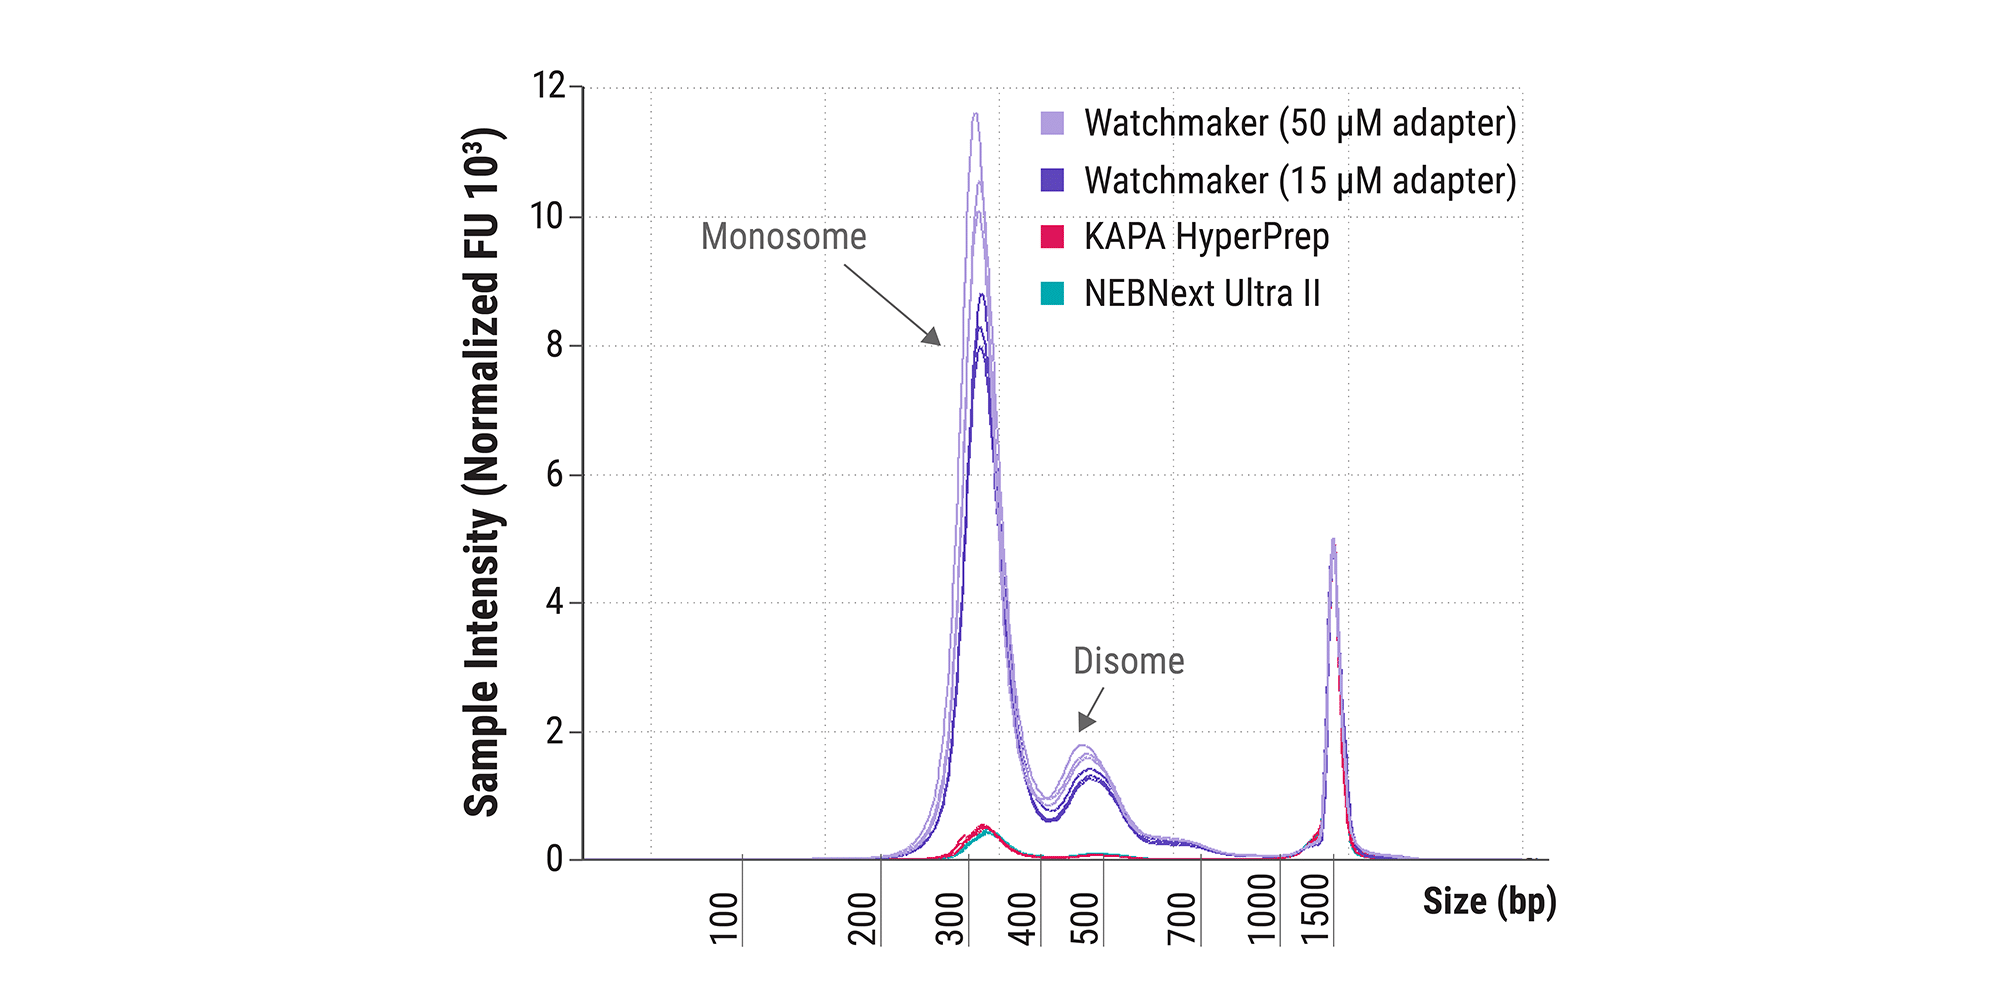 Figure 2A. Improved yield with cfDNA. Final library traces for libraries were prepared in triplicate from 1 ng of Isopure cfDNA with the Watchmaker DNA Library Prep Kit, KAPA HyperPrep Kit, or NEBNext® Ultra™ II for DNA Library Prep according to each manufacturer’s recommended protocol.   Watchmaker library yields were 9-fold higher compared to libraries prepared with other kits. Additional optimization with increased adapter concentration further improved yields by 20 - 25%. No adapter dimers were observed with any protocol.